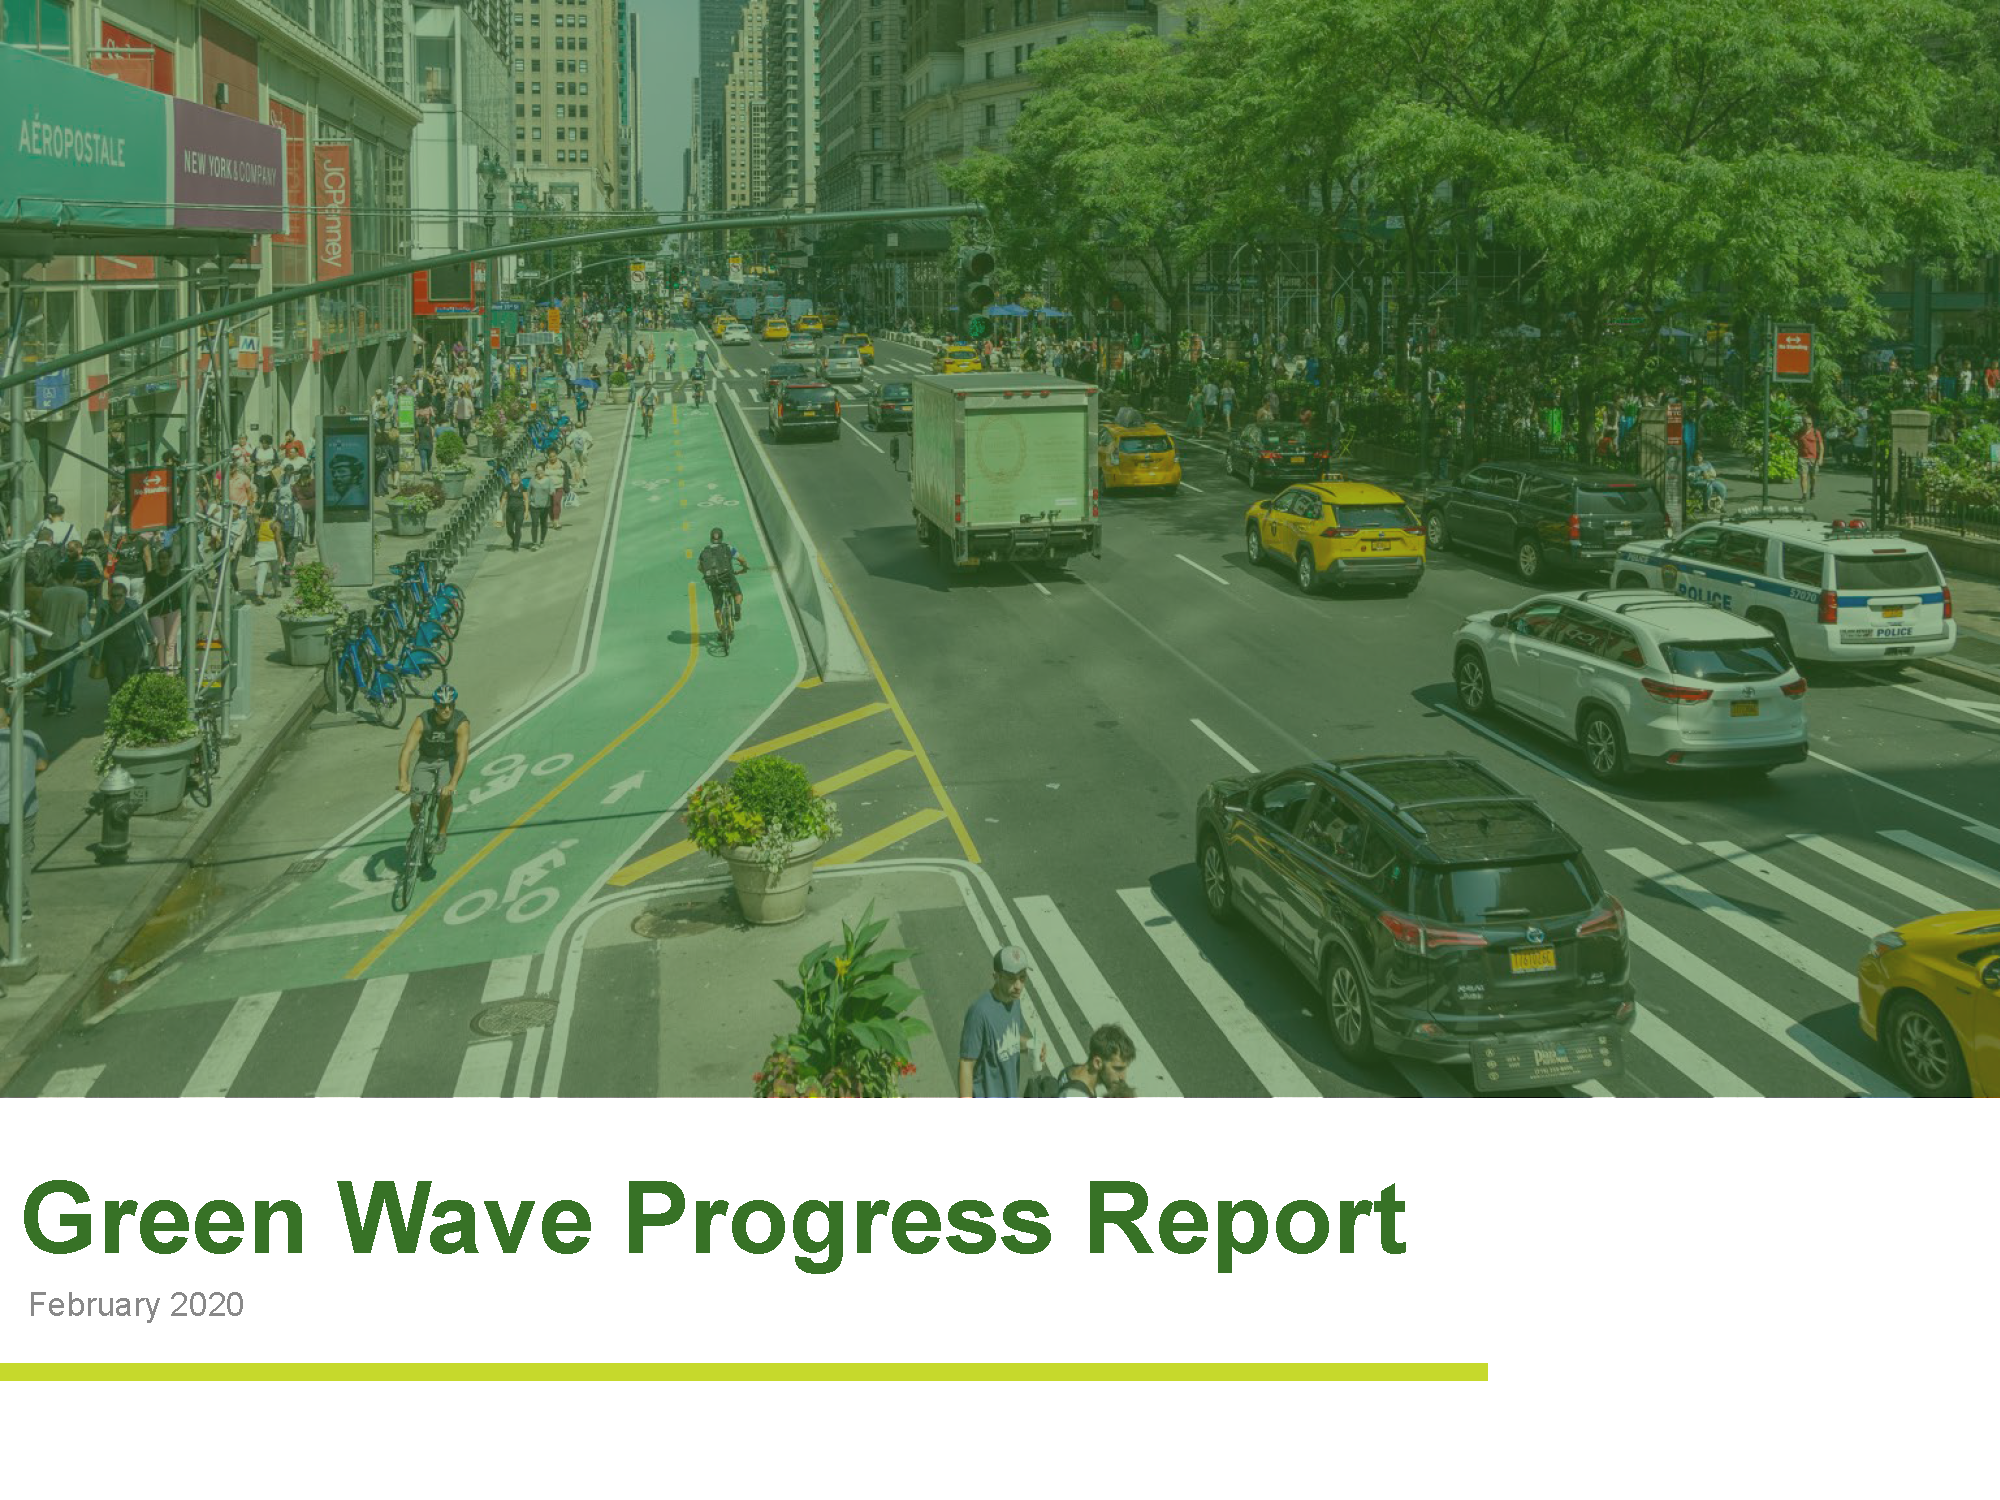 The cover side of the Green Wave Progress Report